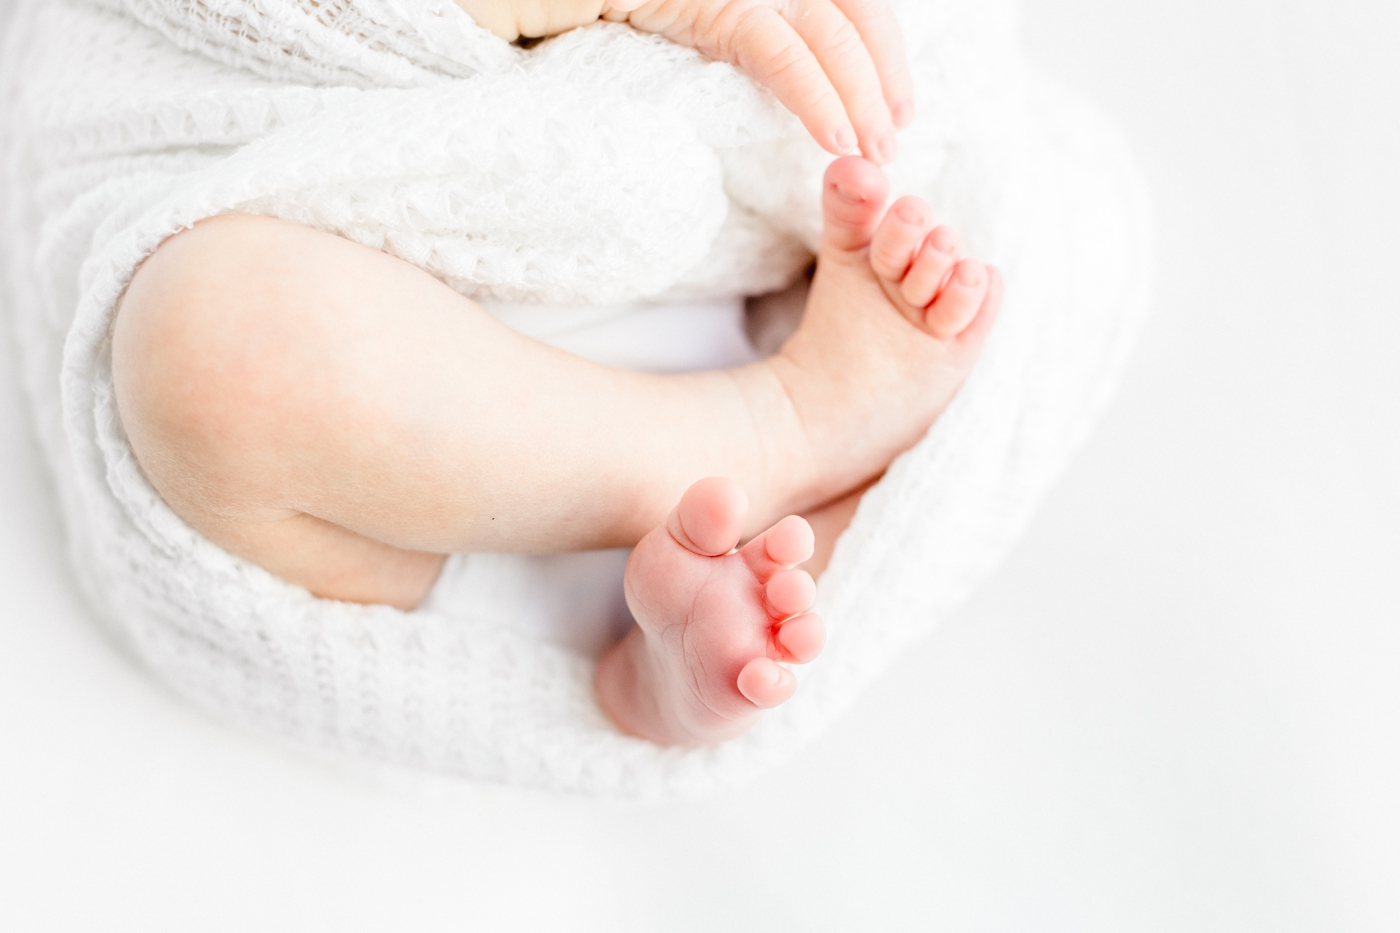 Closeup of newborn toes while baby is wrapped in white knit swaddle. Photo by Sana Ahmed Photography.